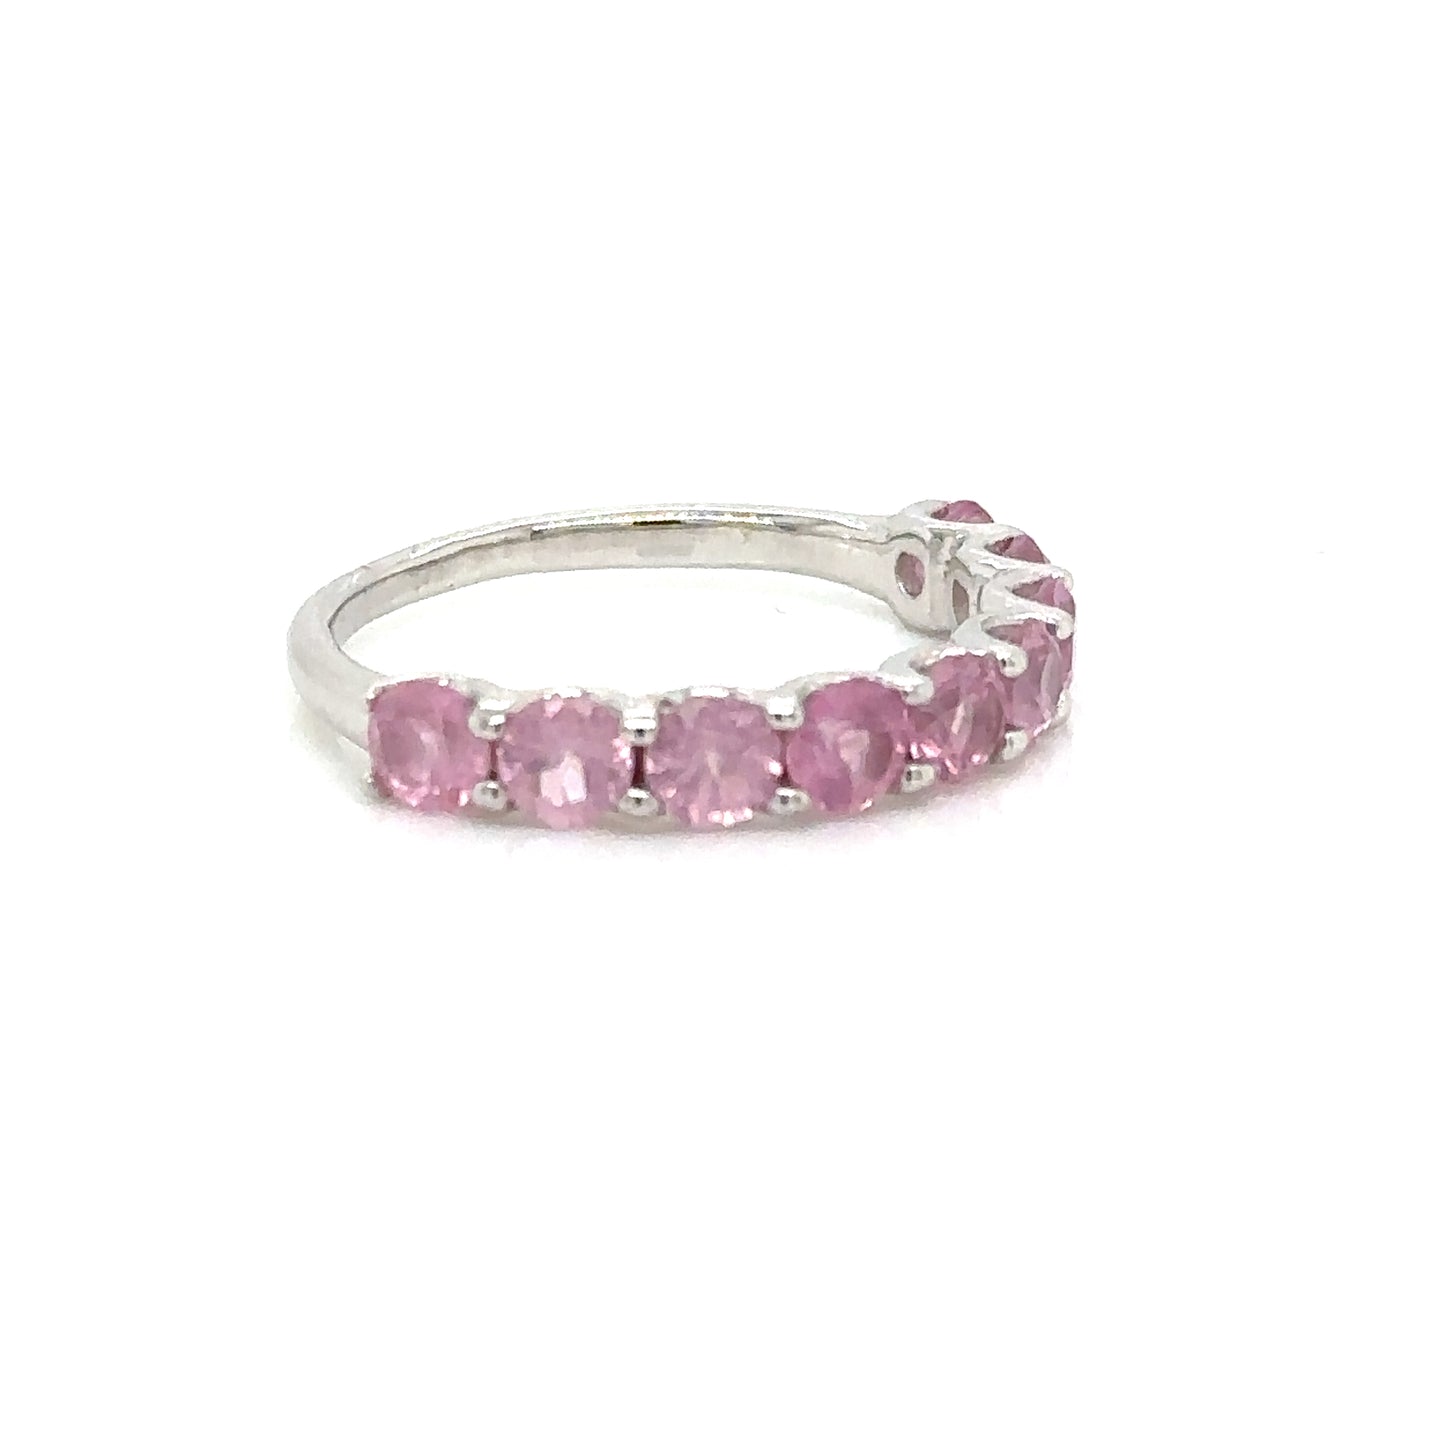 ADVANCE / SECTION Half Churumbela of Opalescent Pink Spinel, total value 8120 pesos 